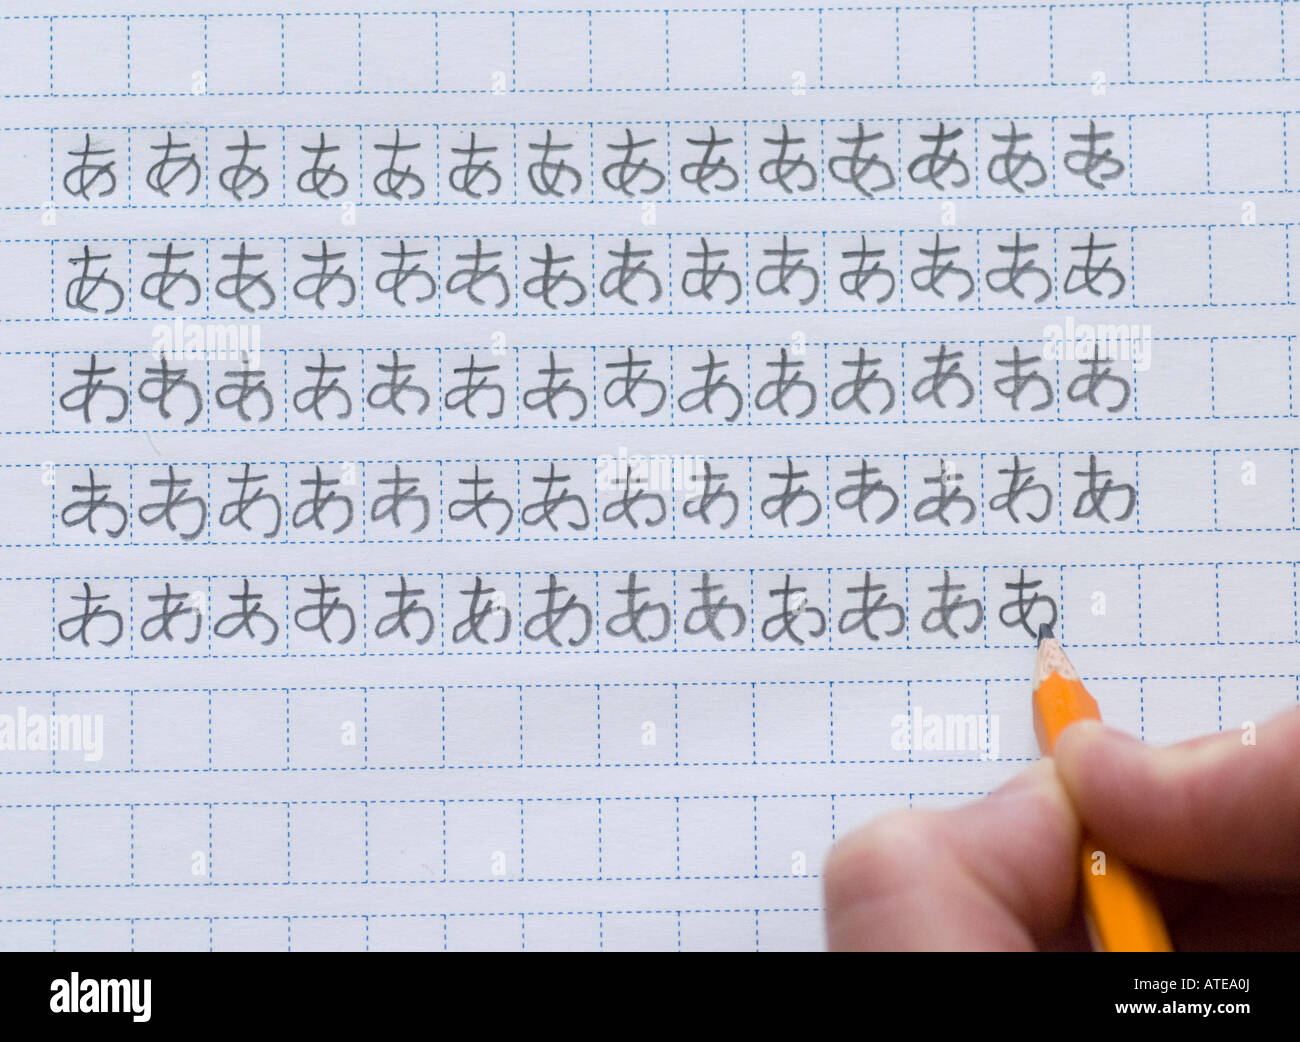 Foreign Student Learning To Write Japanese Hiragana ...